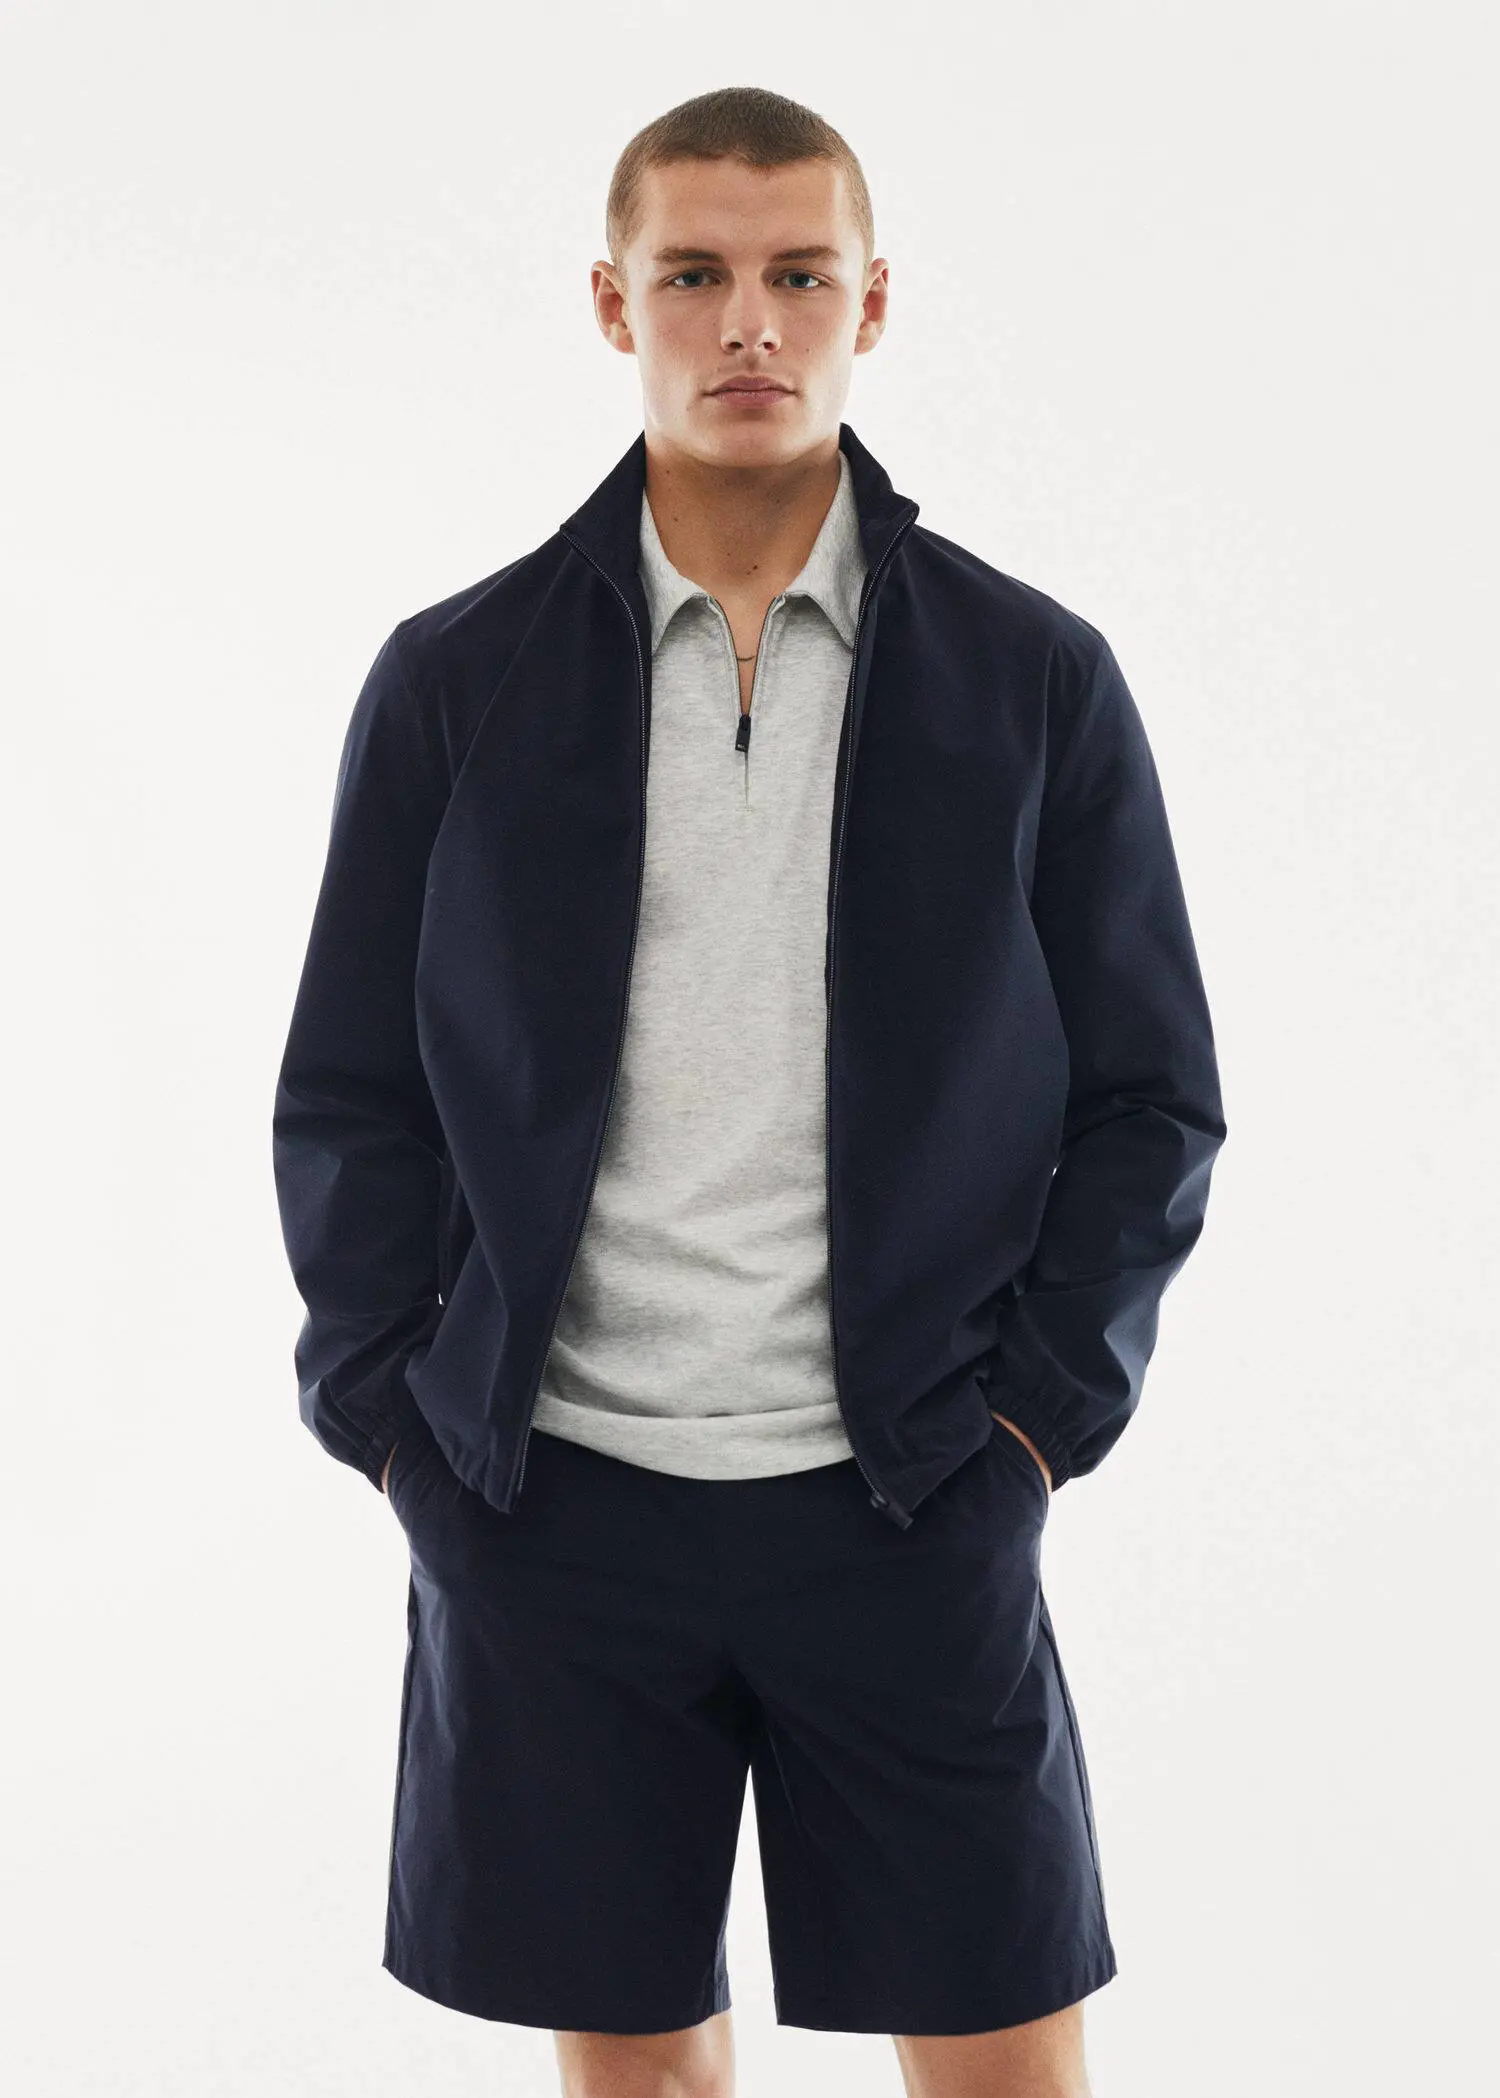 Mango Water-repellent bomber jacket. a man in a black jacket and white shirt. 